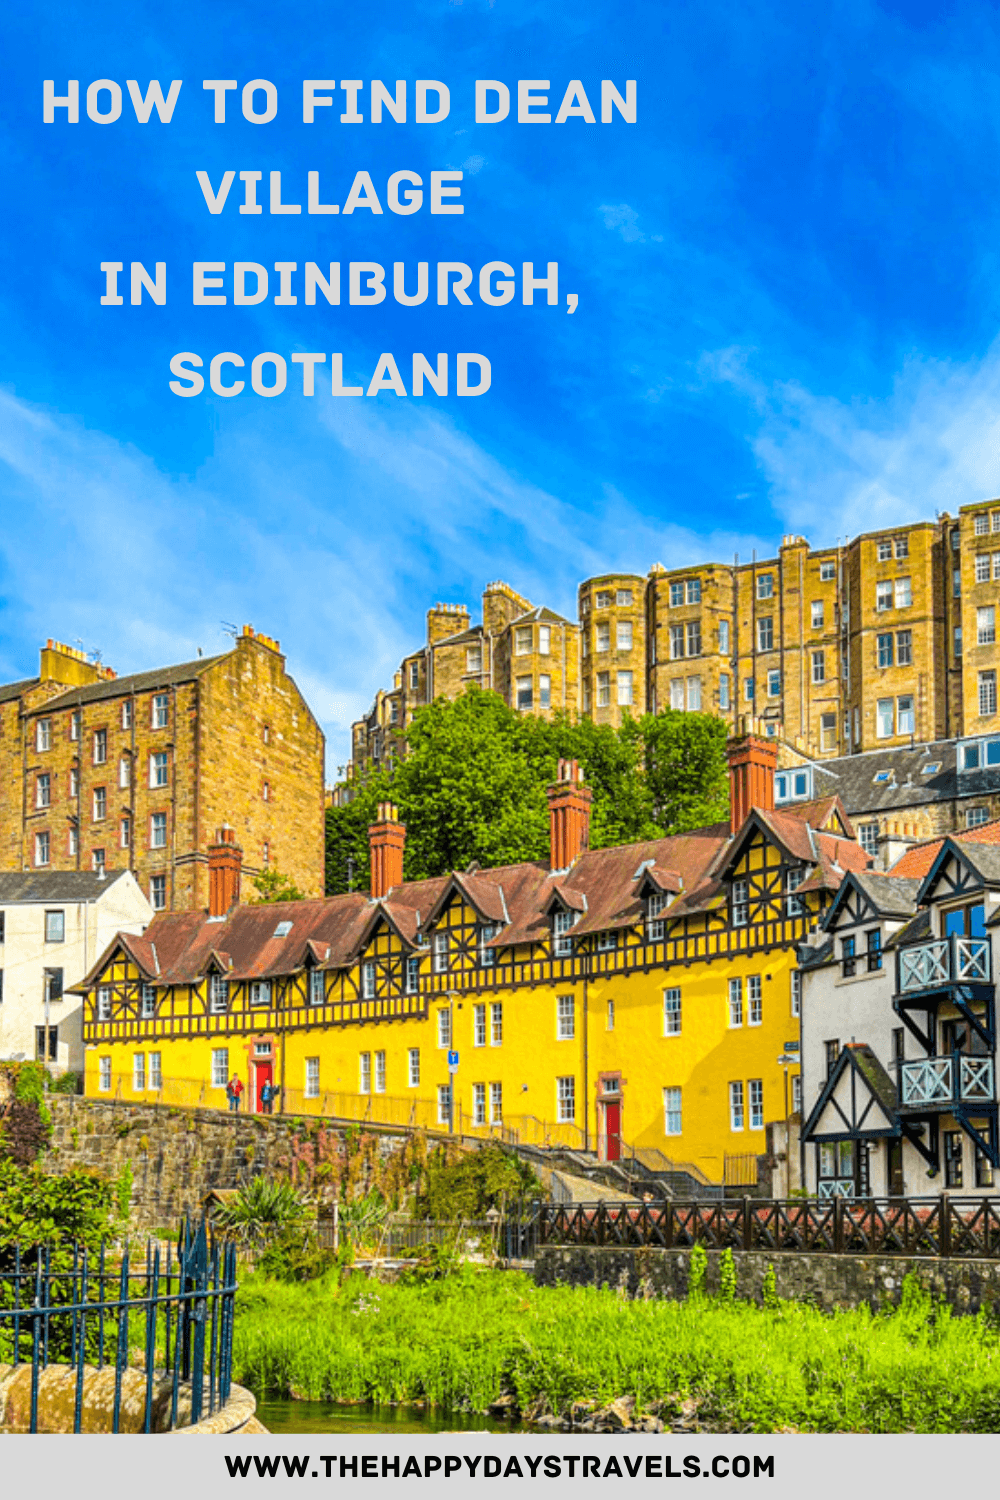 pin image for how to find Dean Village in Edinburgh, Scotland with yellow houses in background